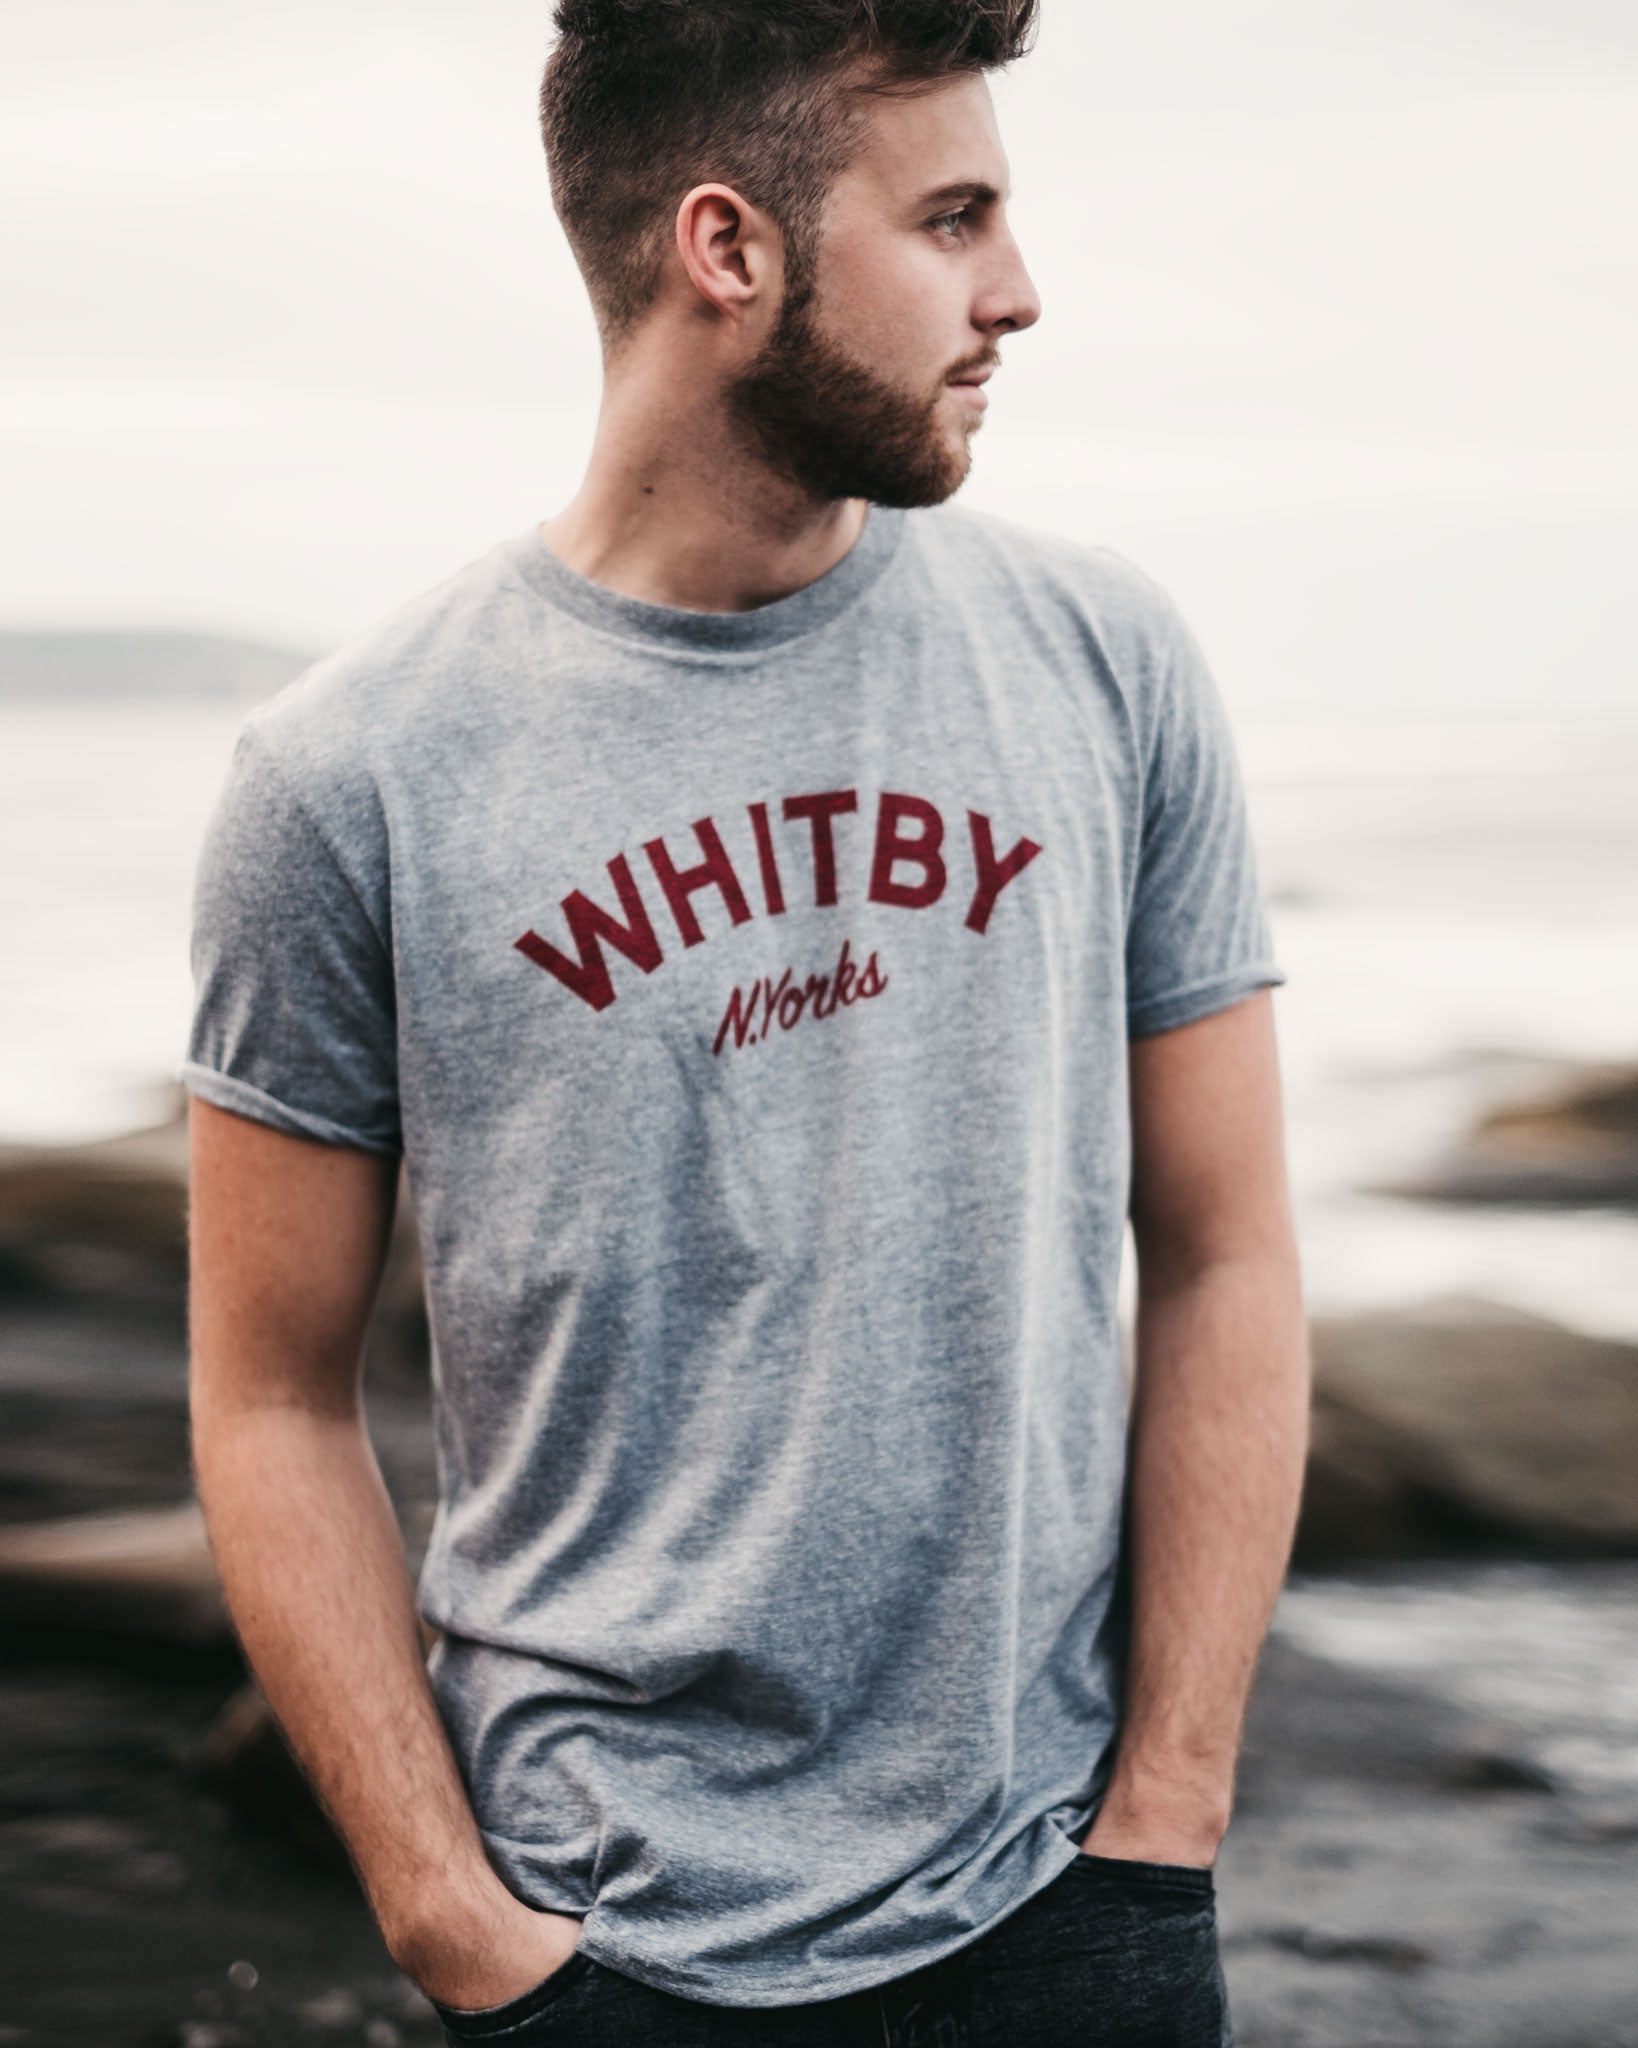 Whitby North Yorks Grey T-Shirt by ART DISCO Original Goods